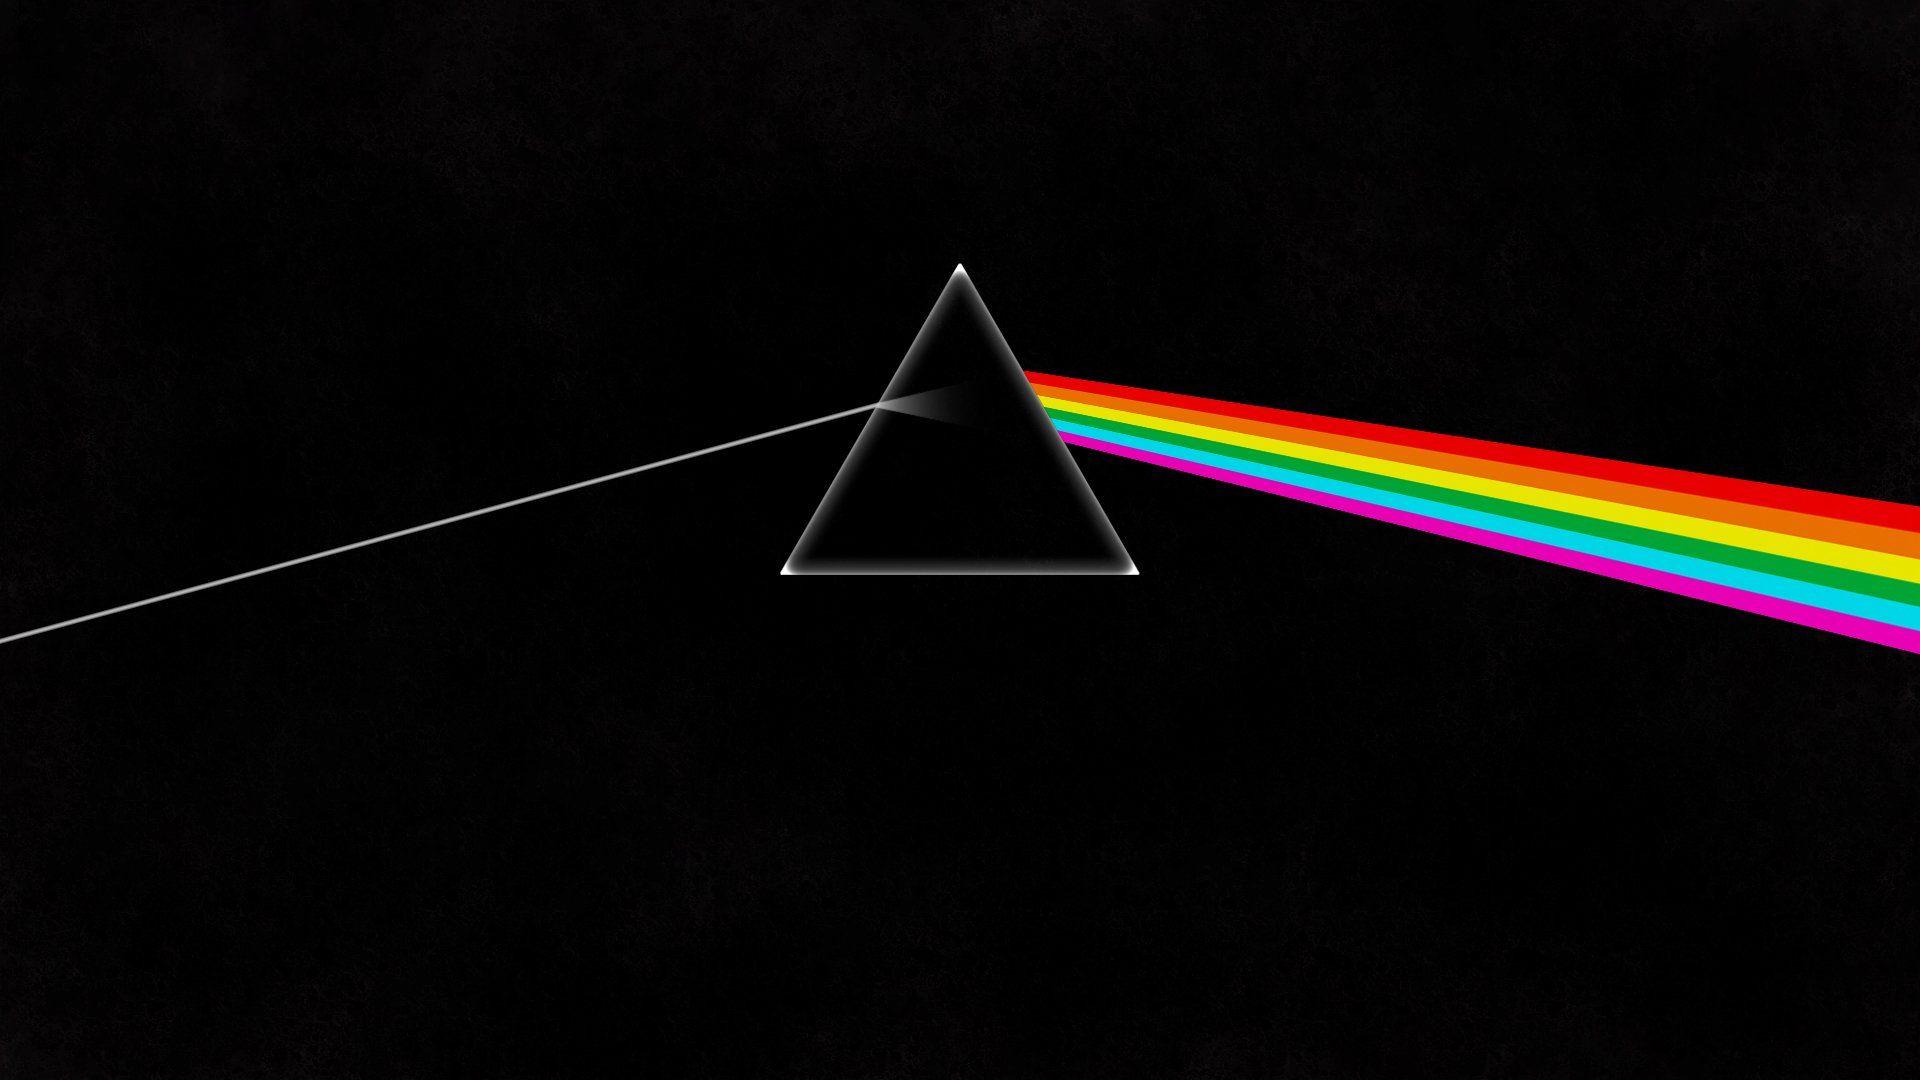 Download 888+ Wallpaper 4k pink floyd In HD for Your Desktop and Mobile